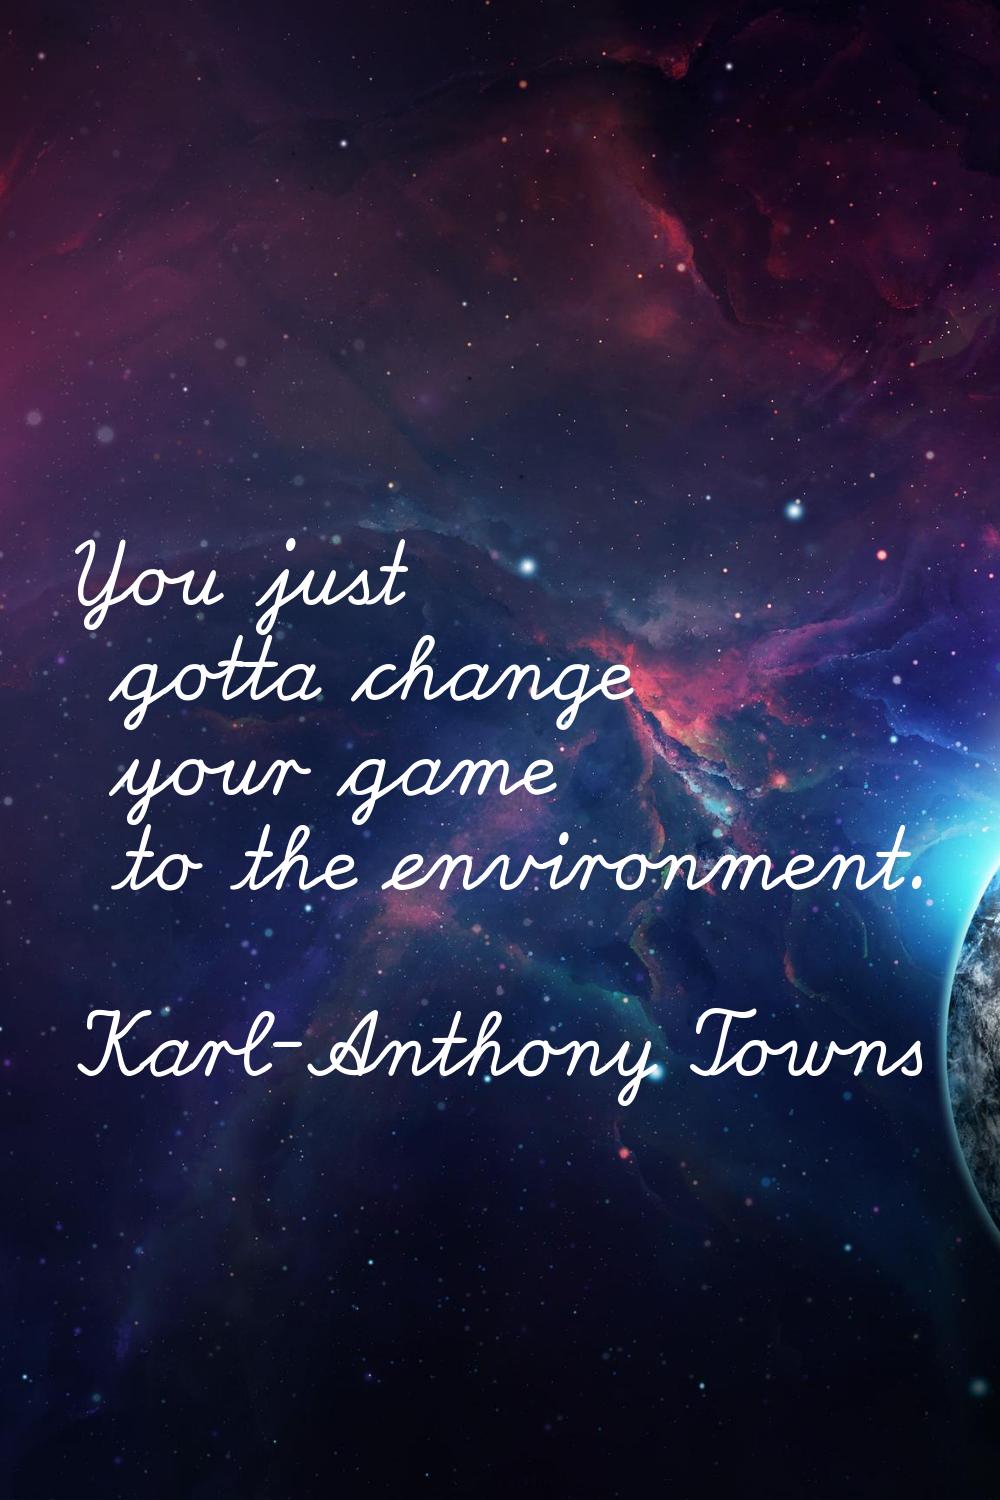 You just gotta change your game to the environment.